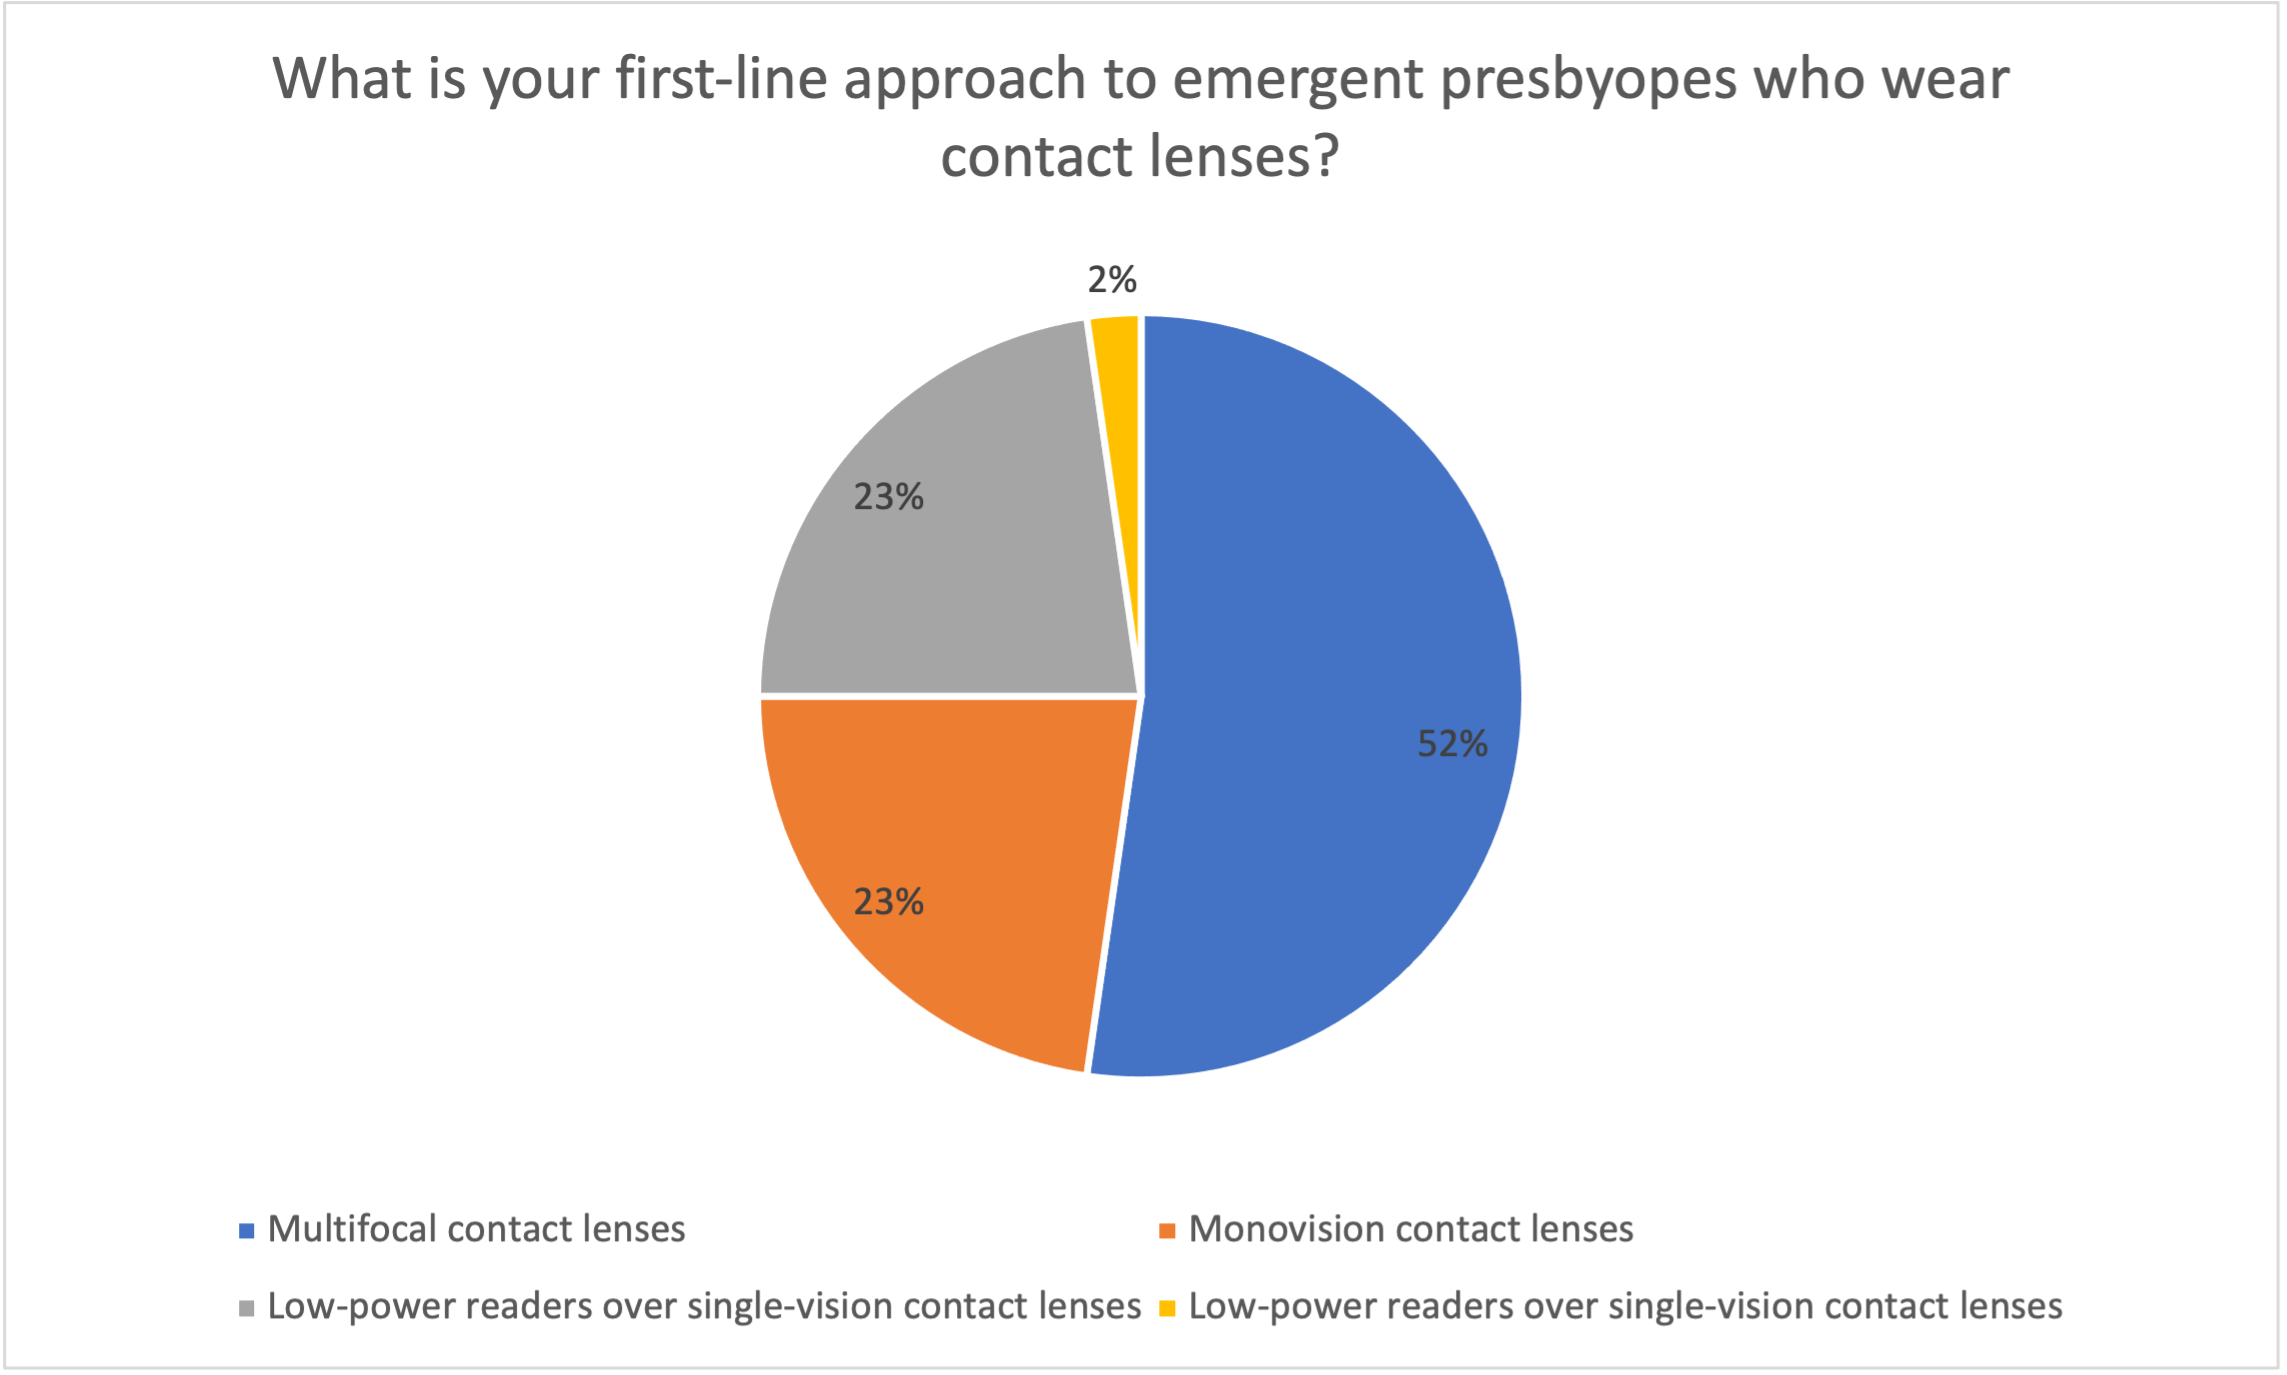 Poll results: What is your first-line approach to emergent presbyopes who wear contact lenses?